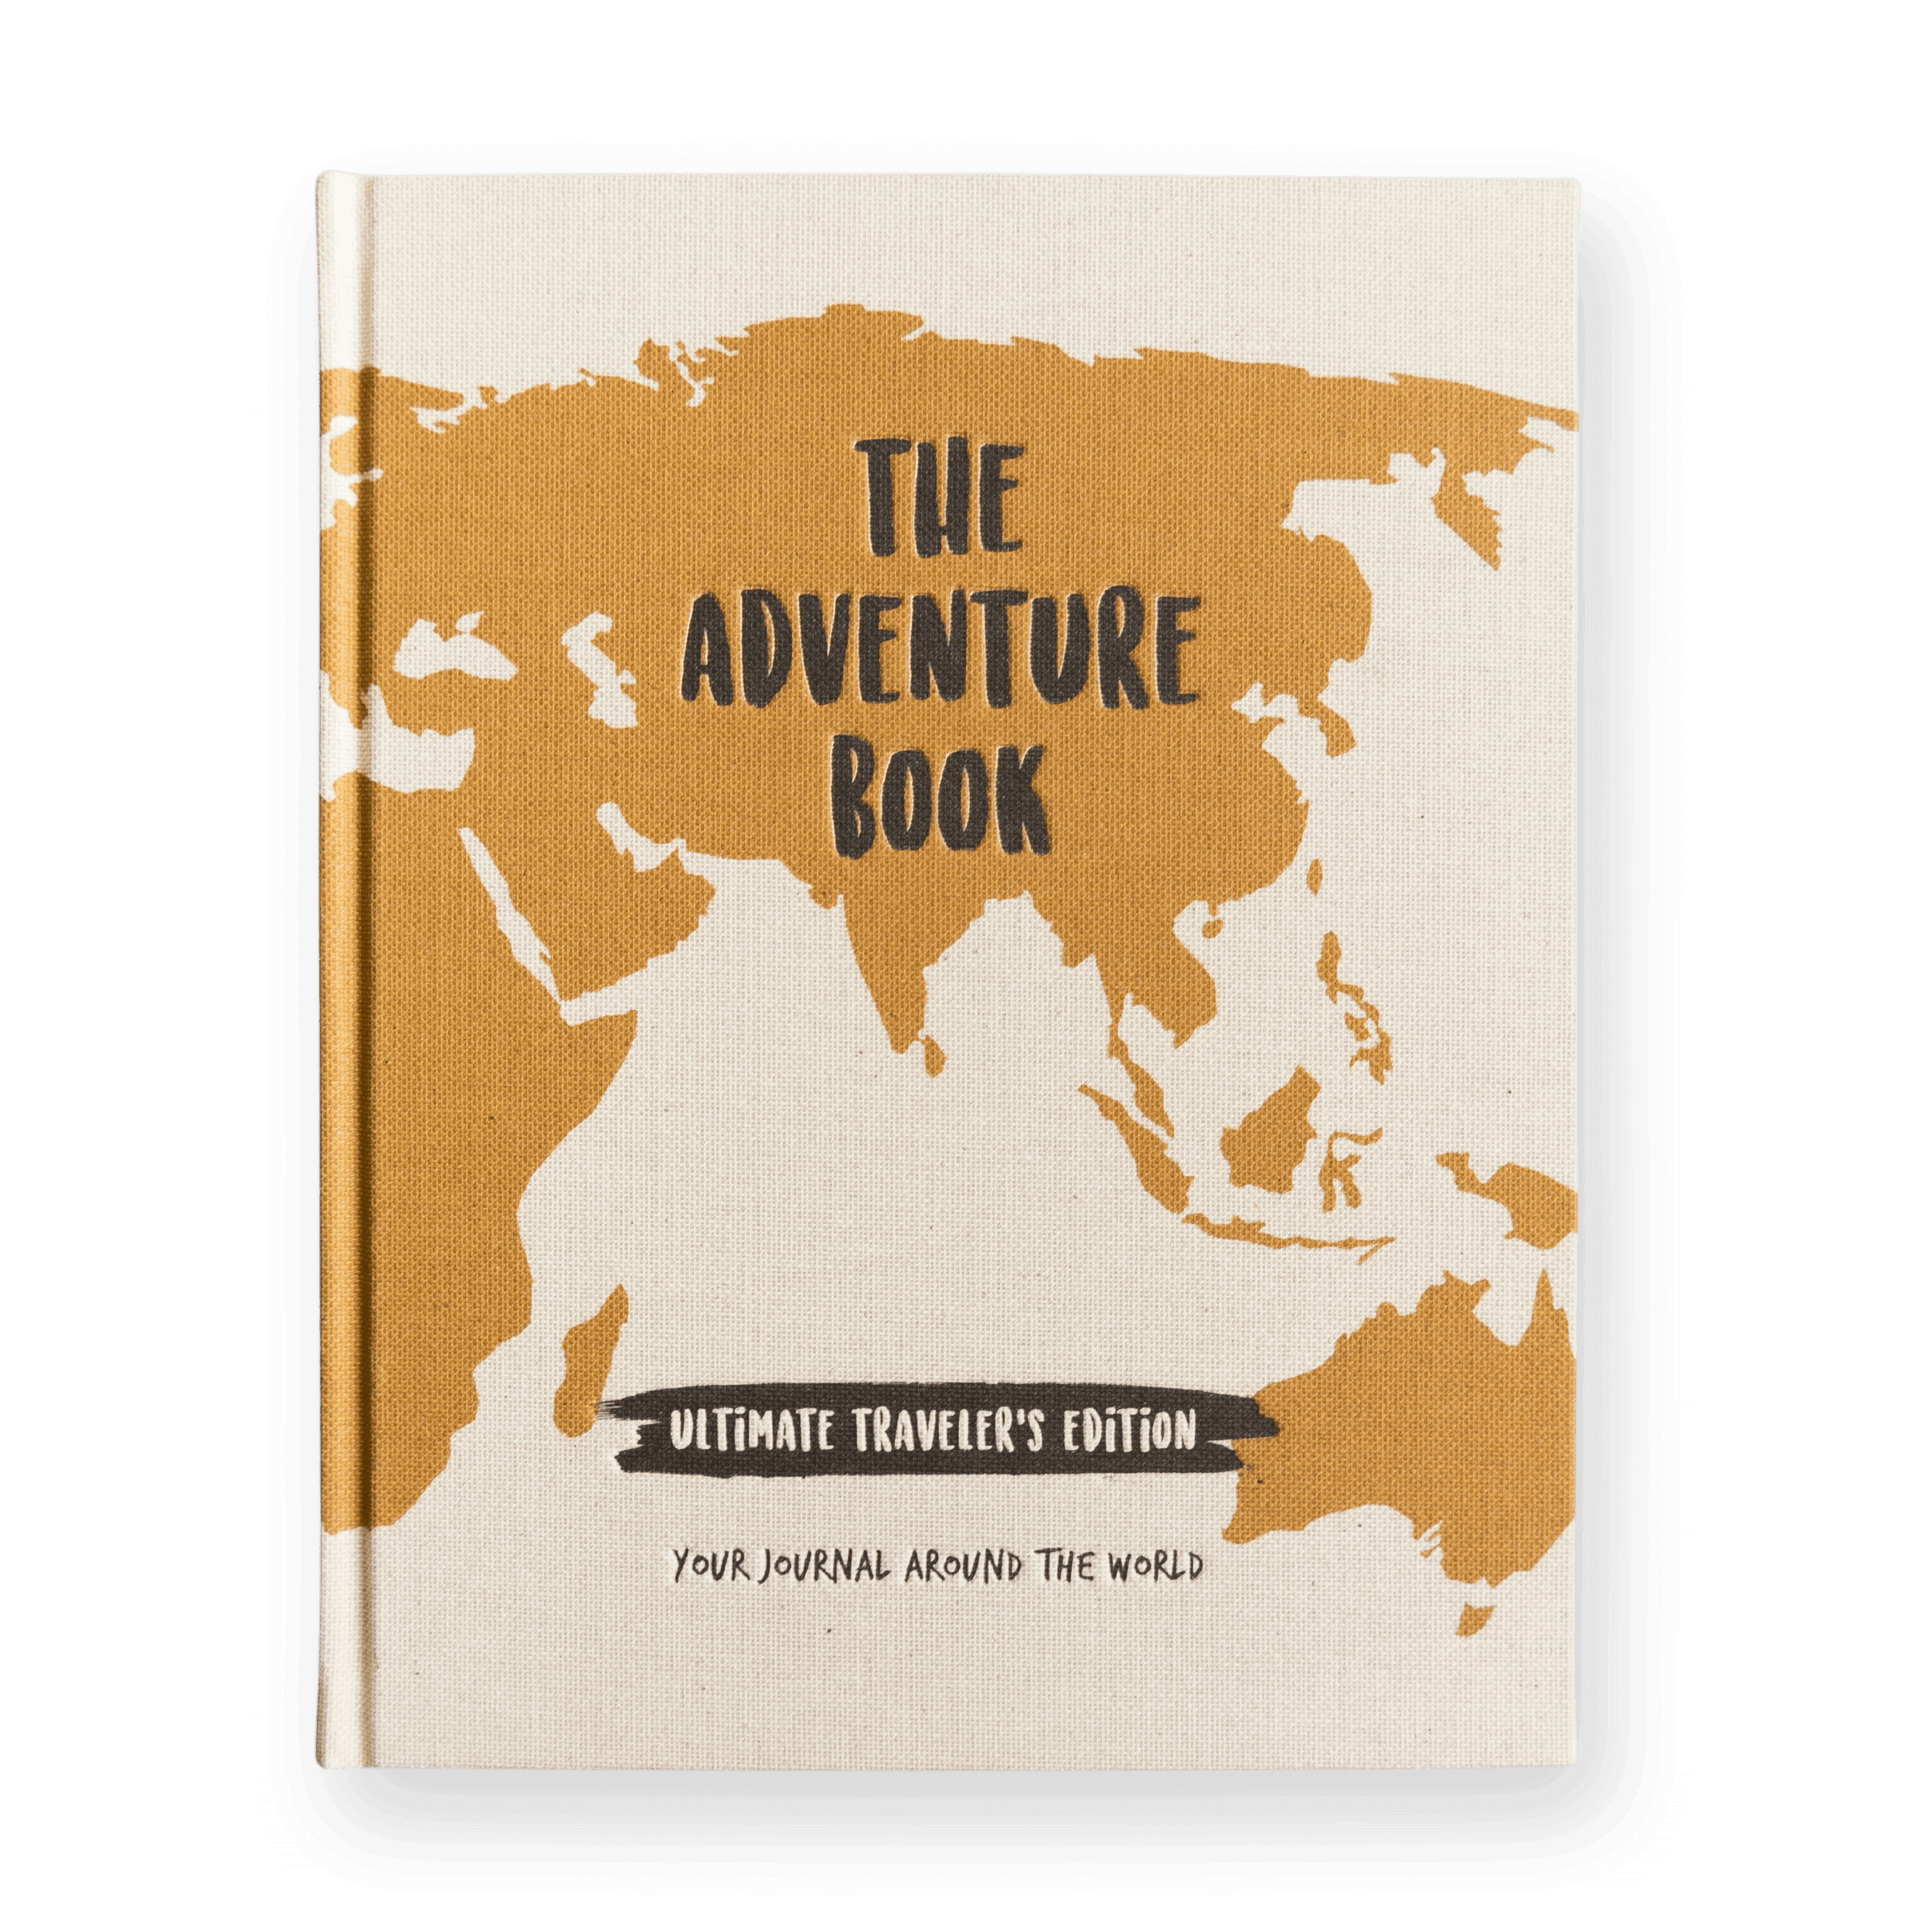 The Adventure Book Ultimate Traveler's Edition - Europe